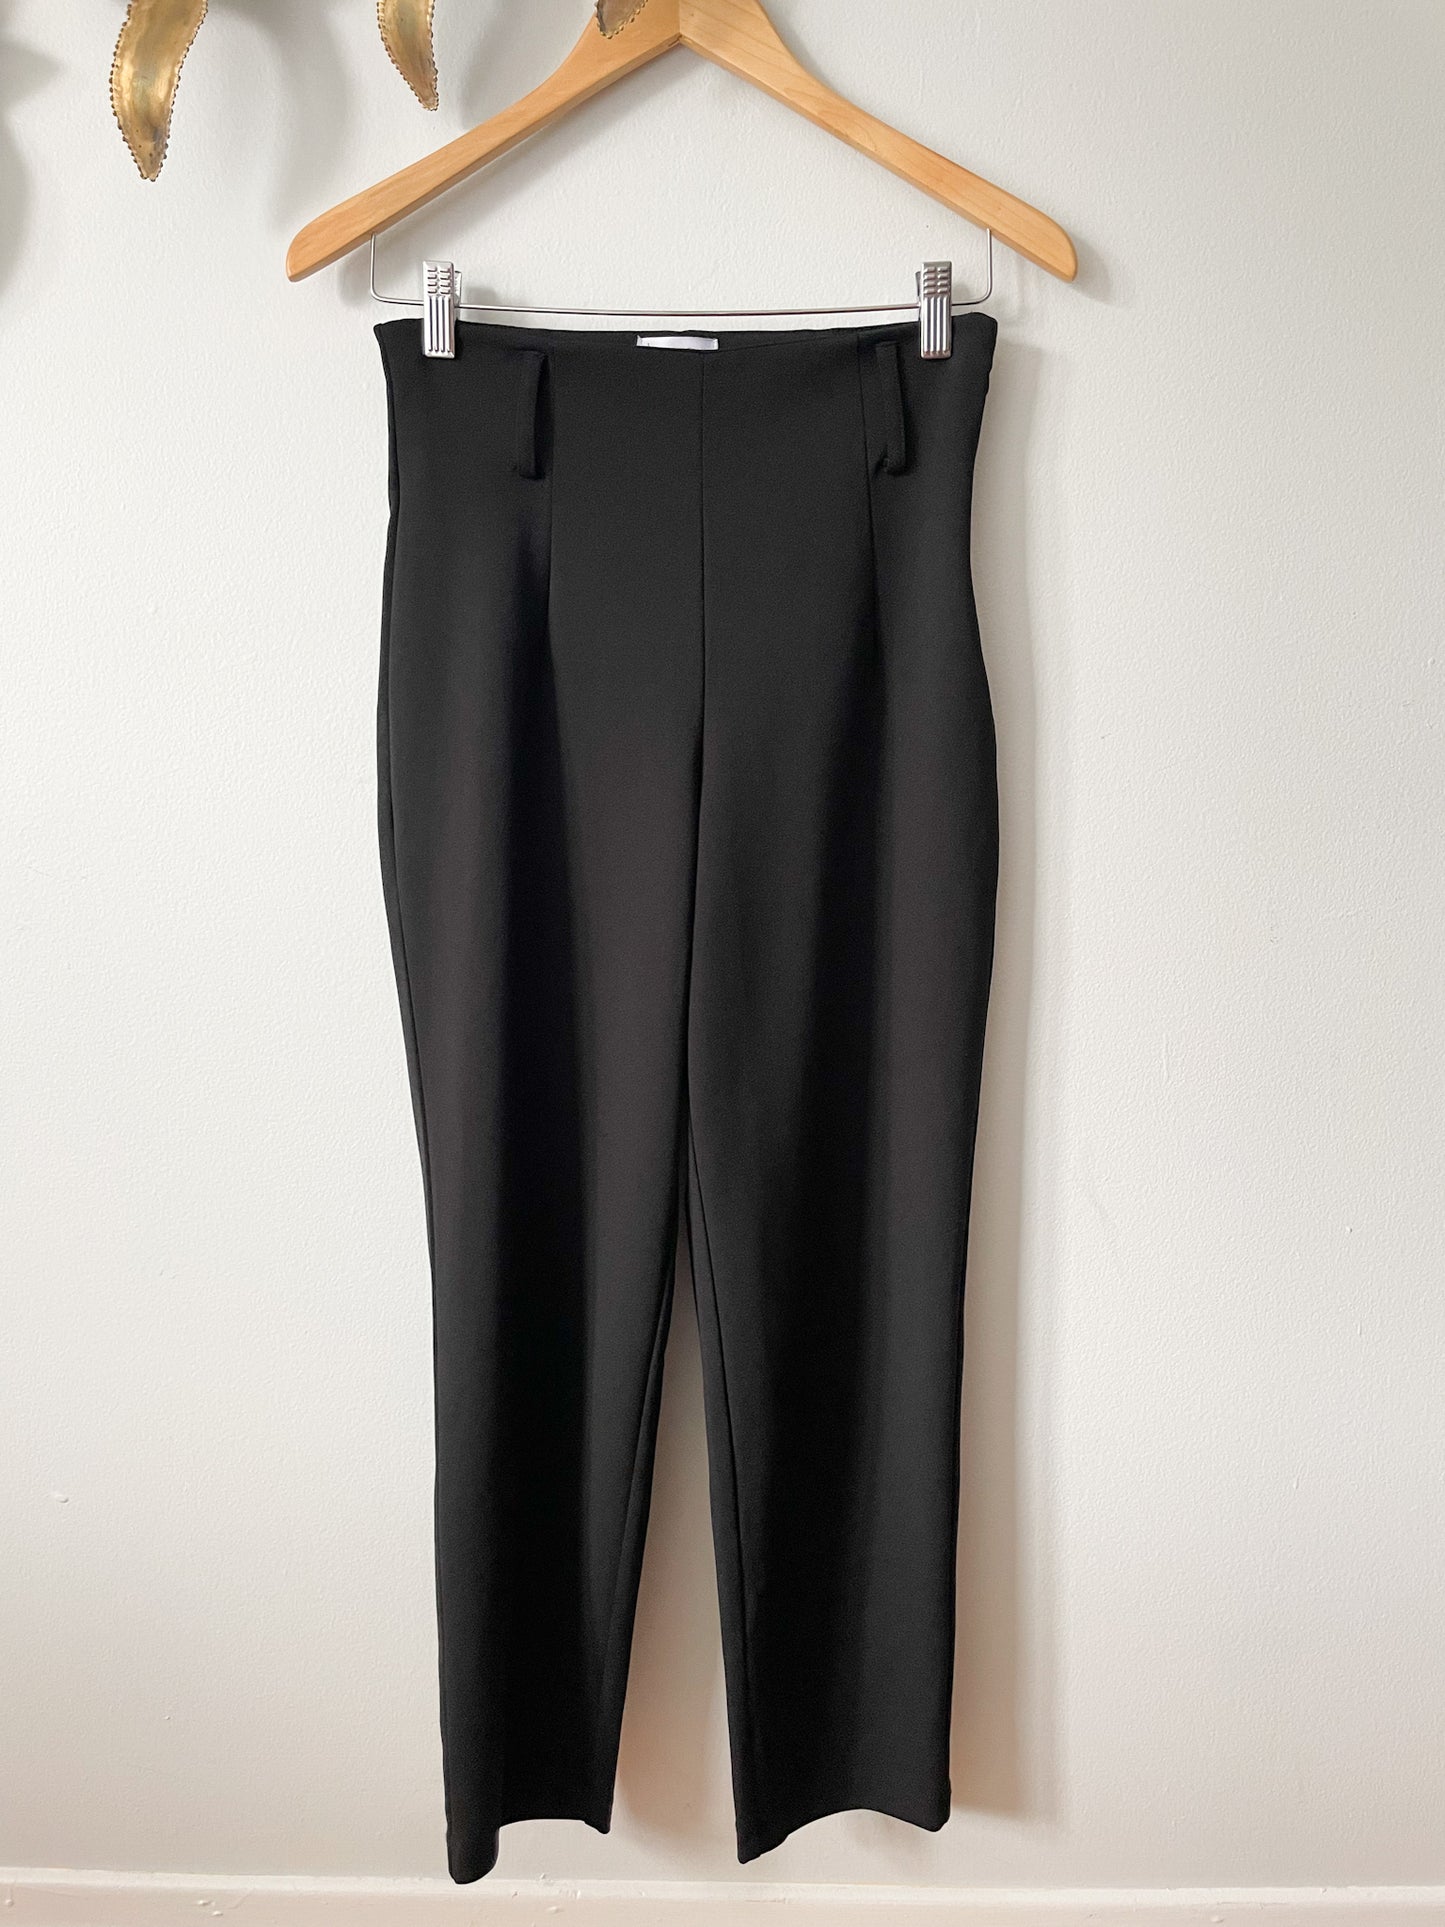 nordstrom collection pants